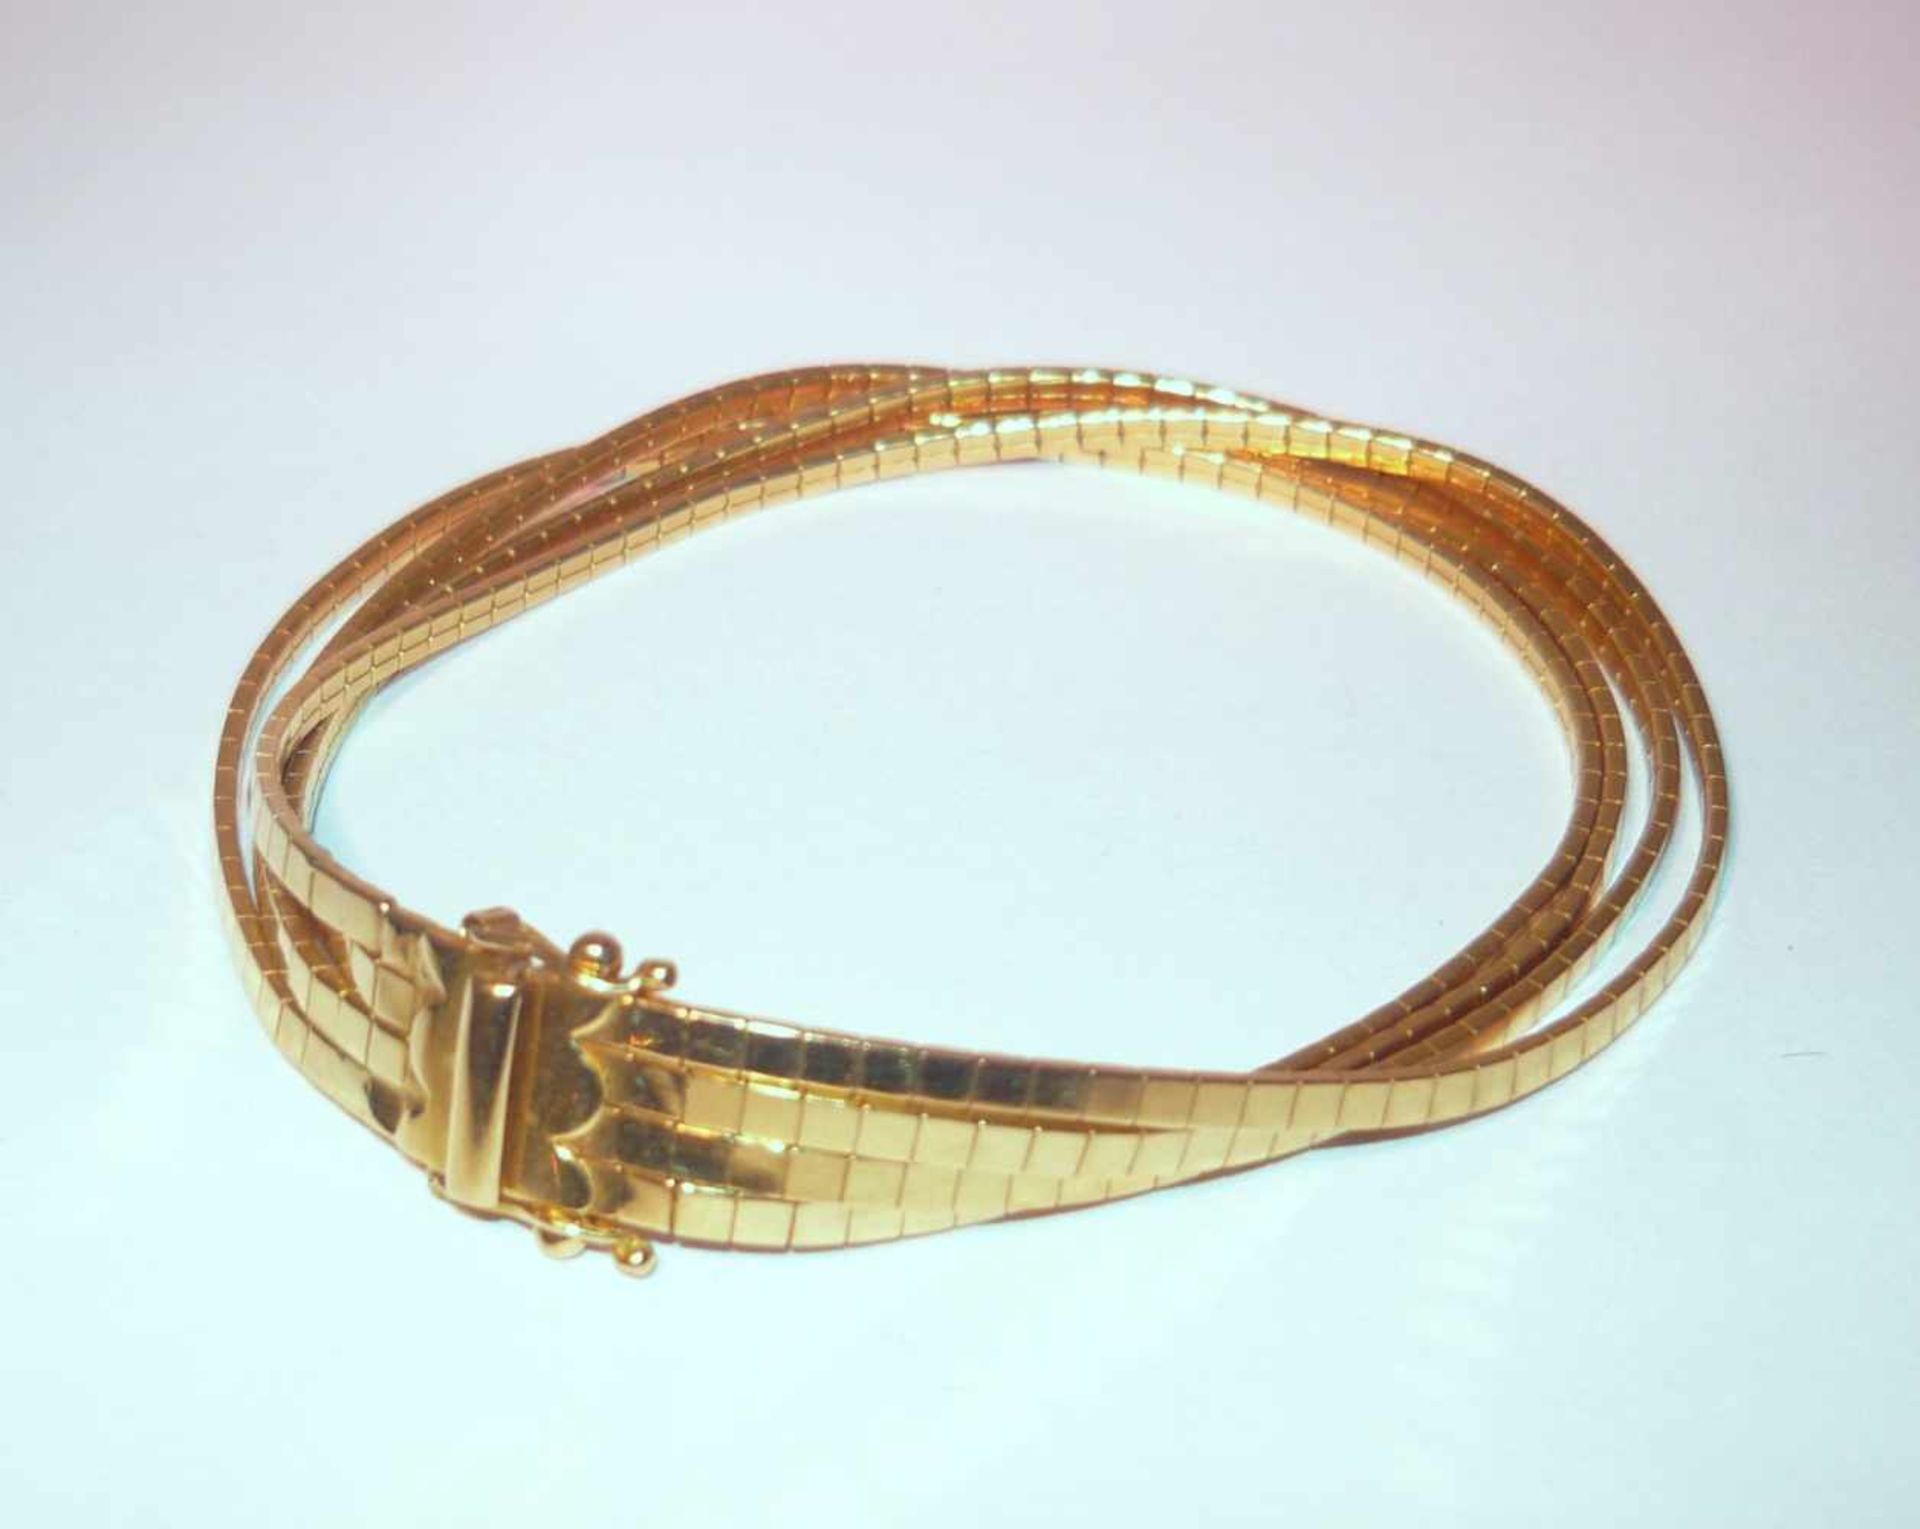 Vierreihiges Armband in 750er GG (18K). Gew. ca. 25,2 g. Four row armband in 750 GG (18K). Weigh.